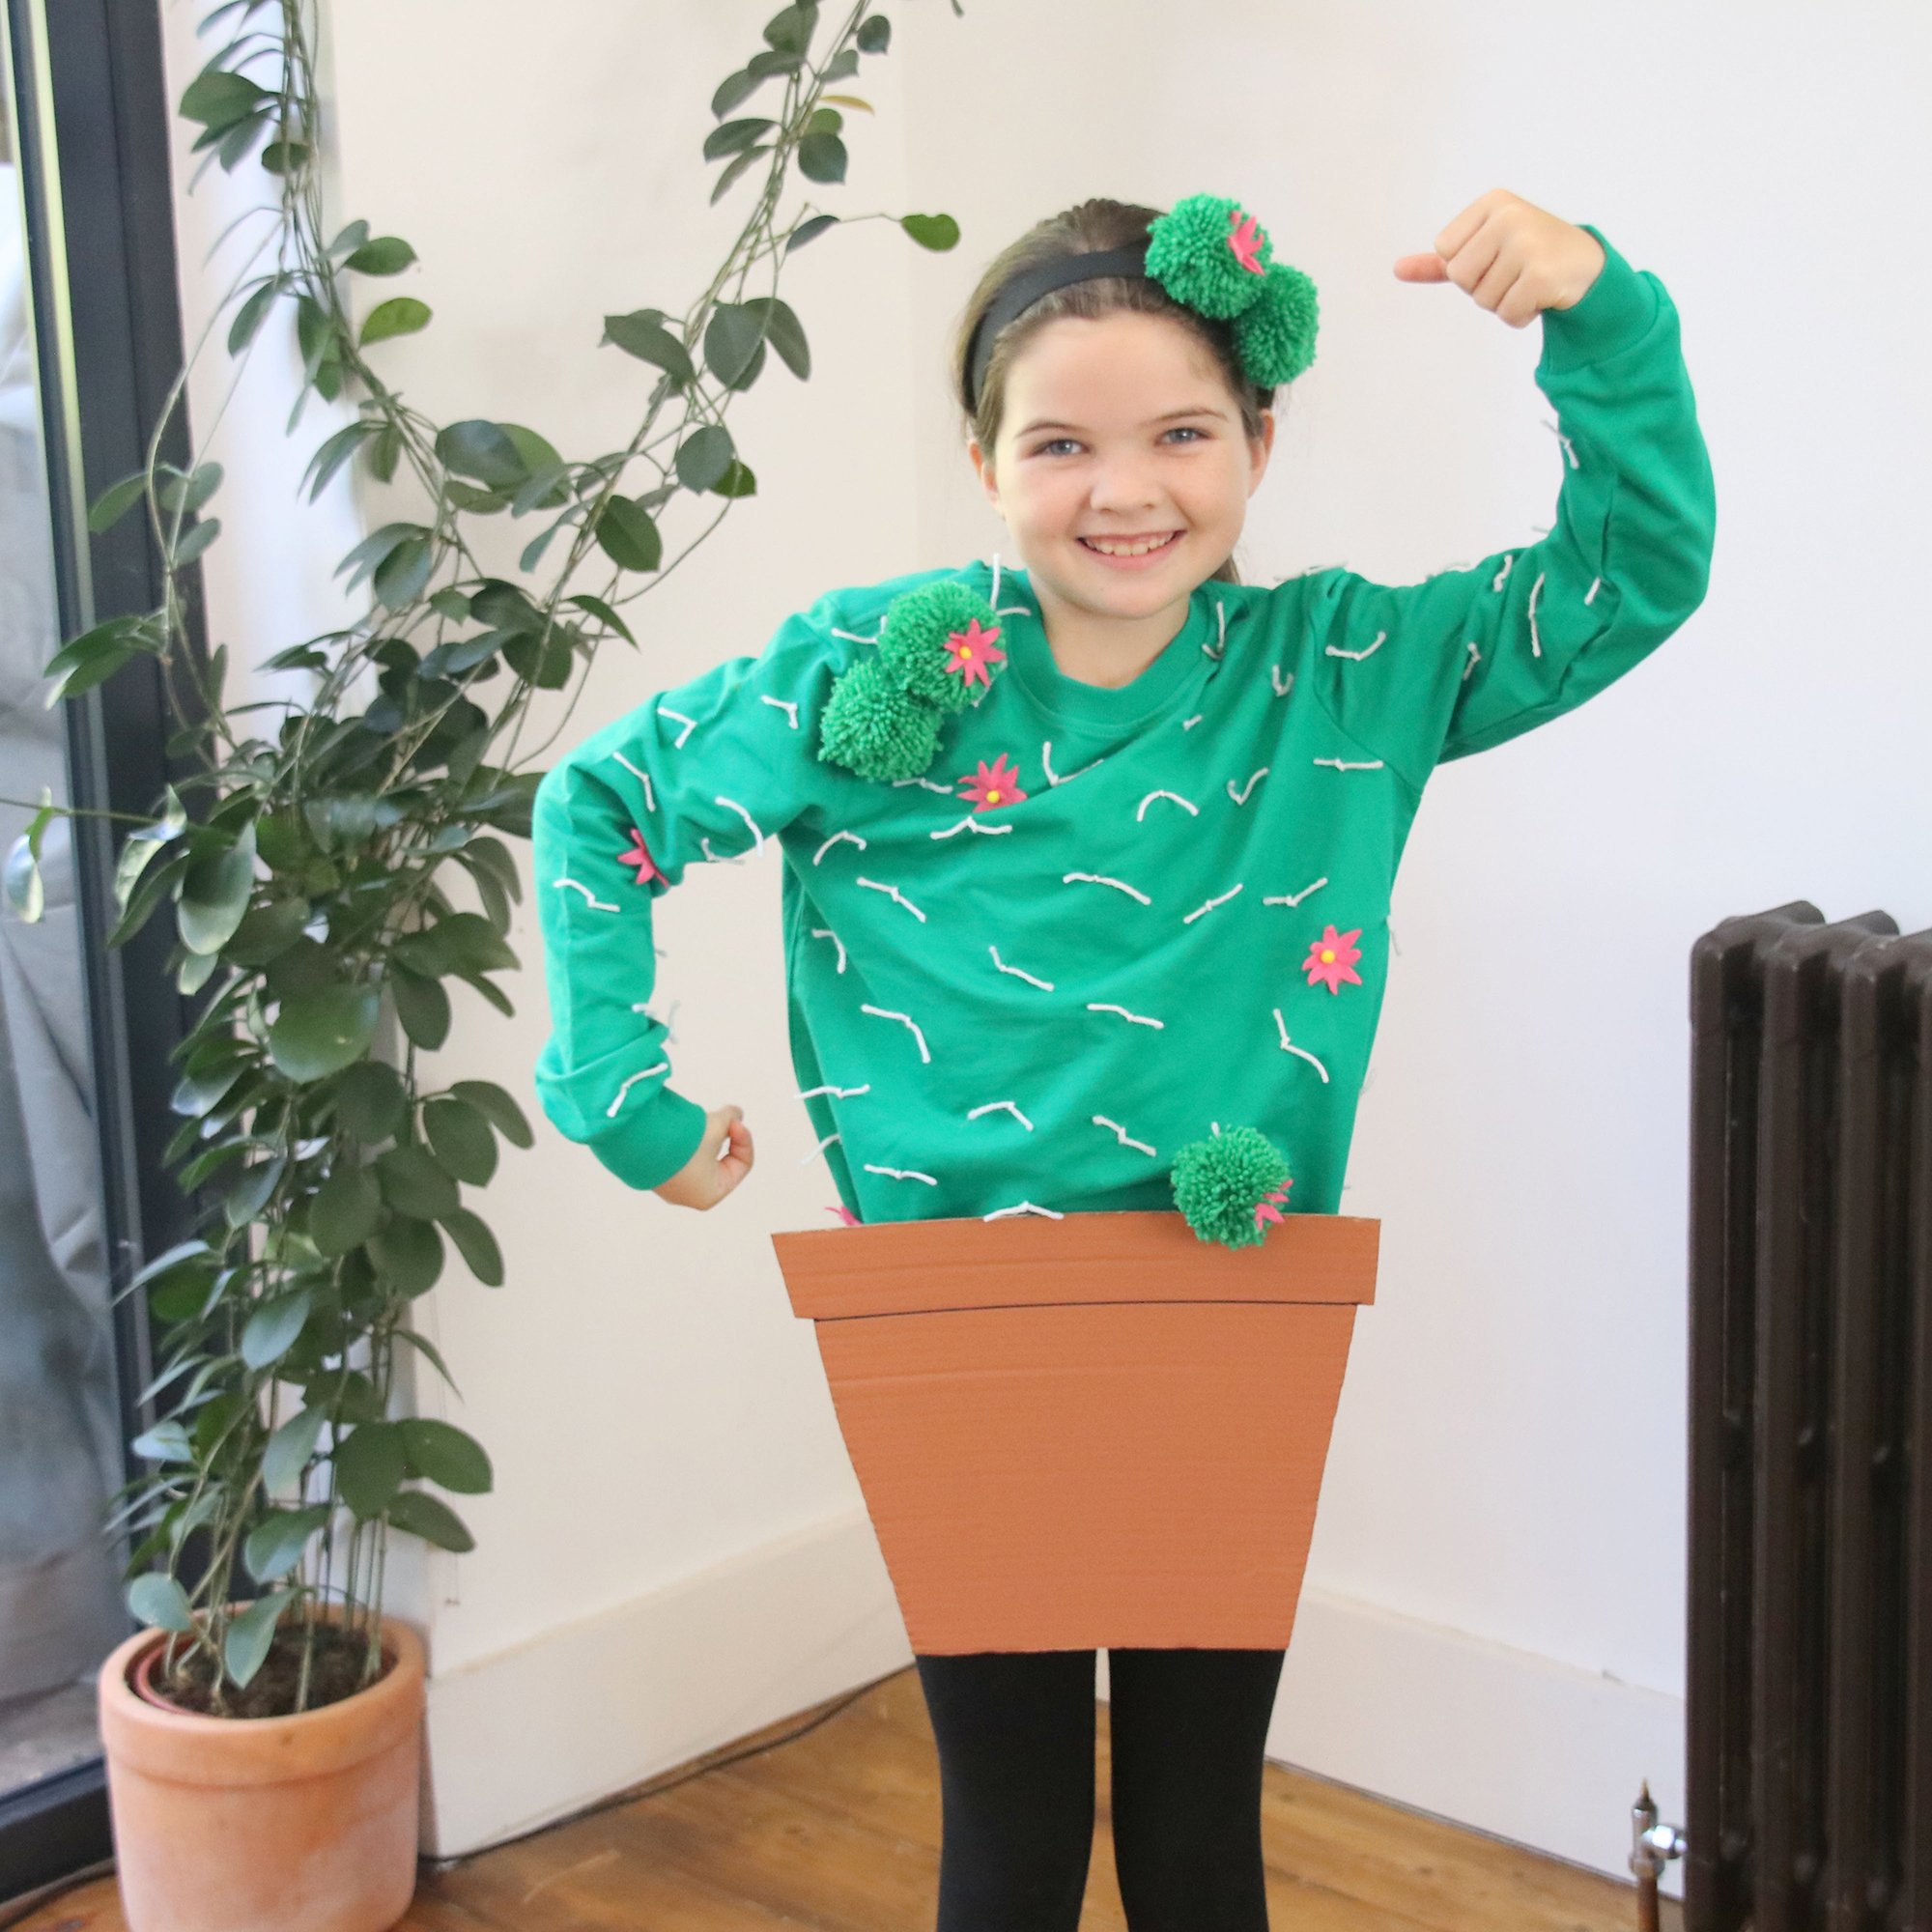 How to Make a Cactus Costume | Hobbycraft